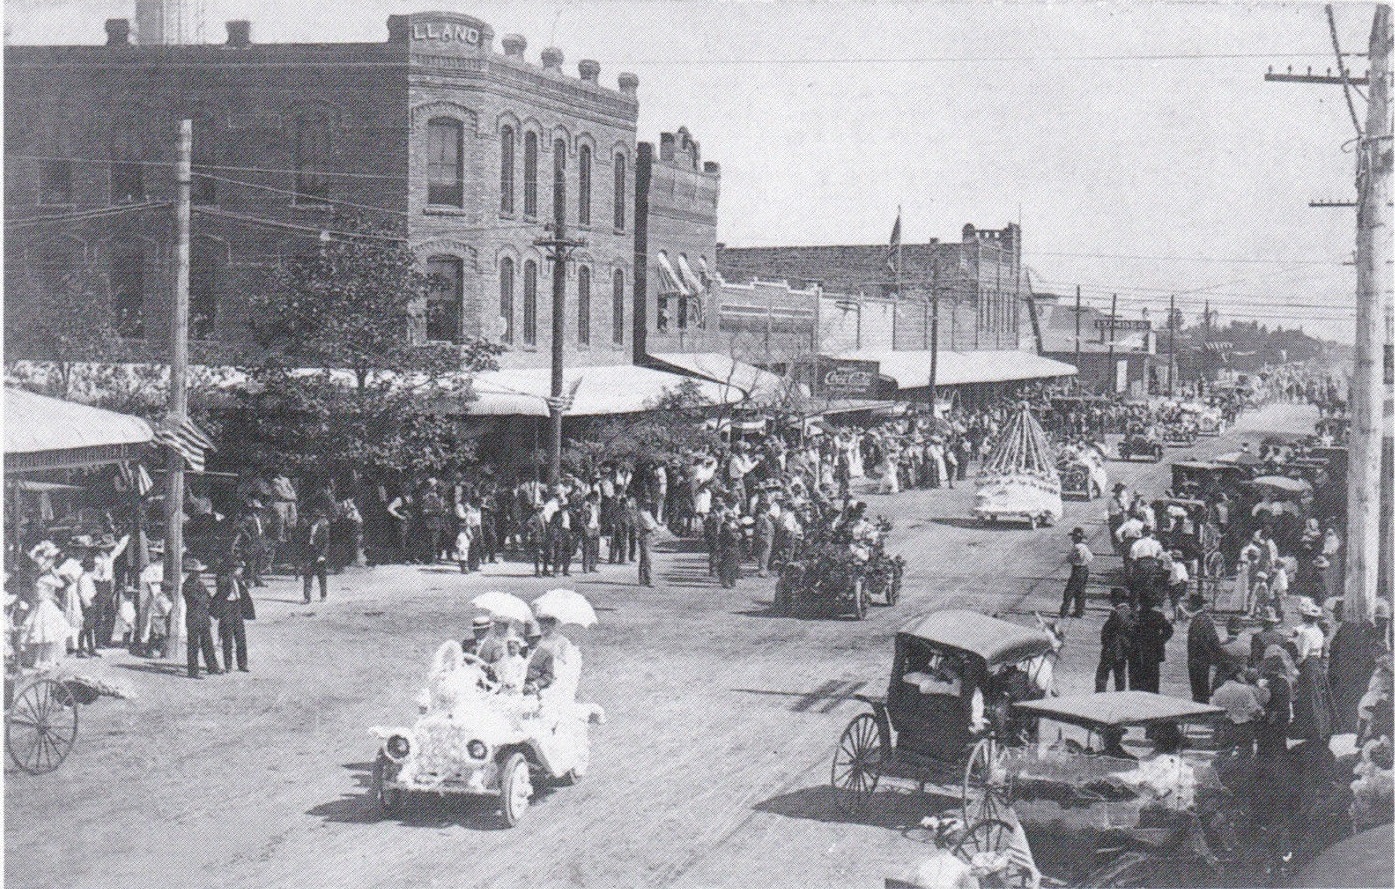 July 4th Parade in Midland Texas in 1918 